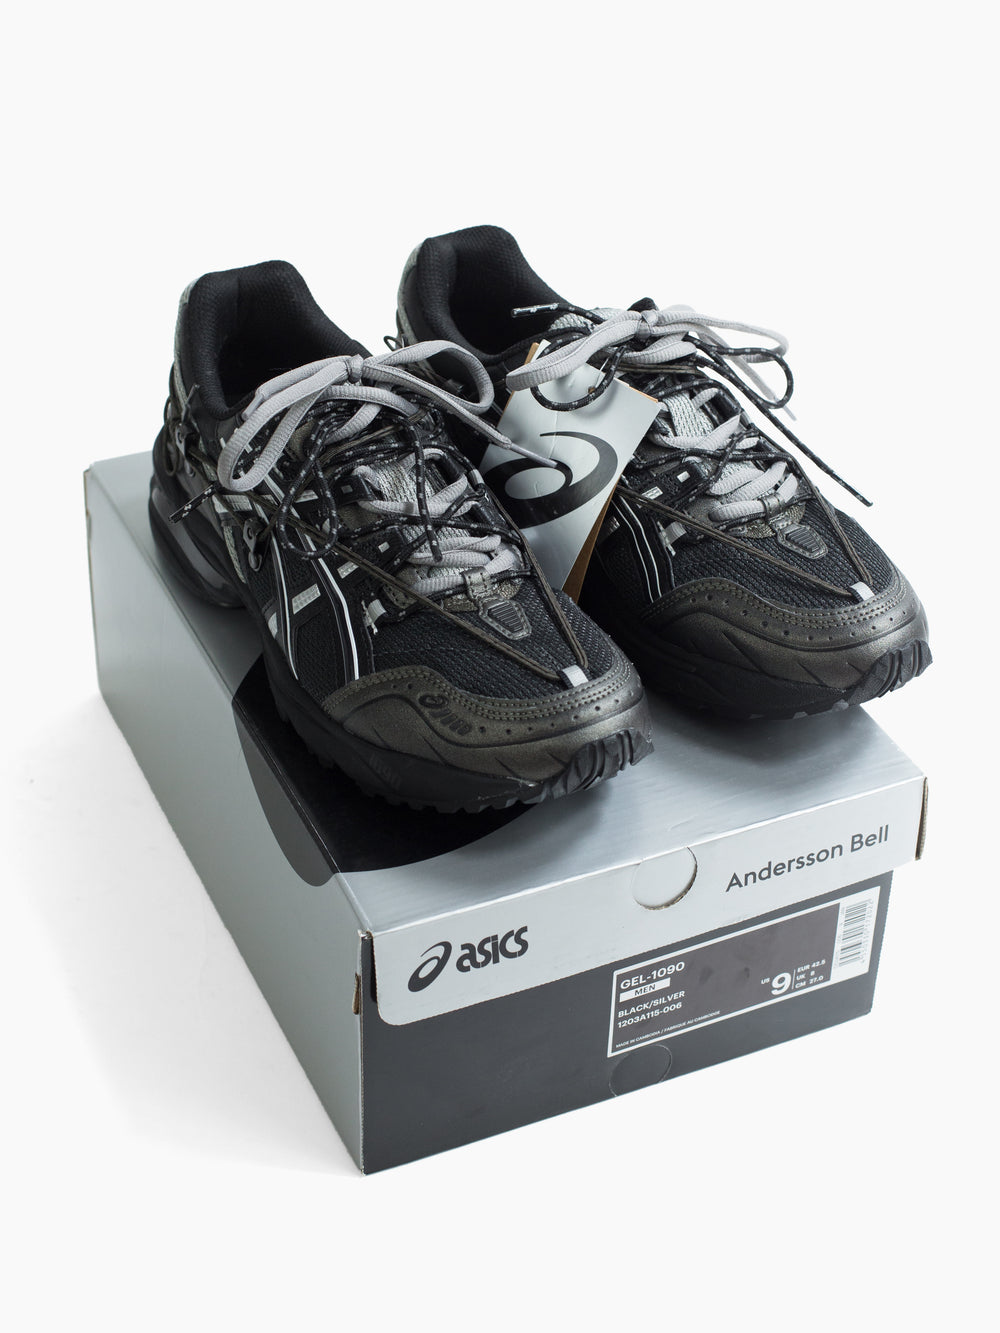 Asics x Andersson Bell SS21 Gel-1090